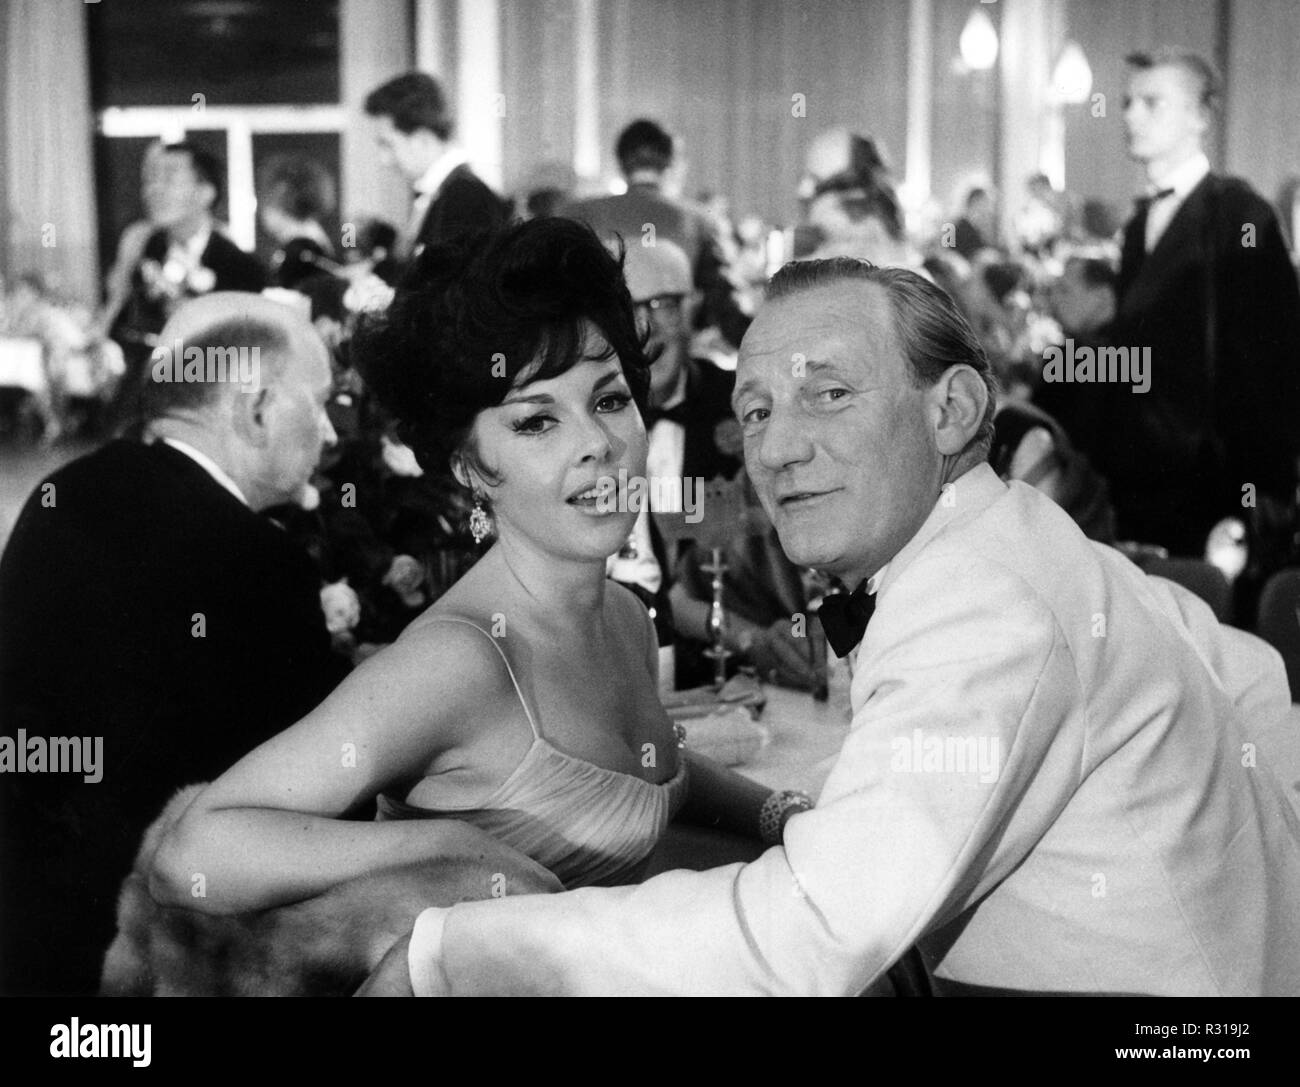 The British actor Trevor Howard and his French colleague Mara Lane are prominent guests of the International Film Ball on 2 July 1960 at the Palais am Funkturm during the Berlinale in Berlin. | usage worldwide Stock Photo